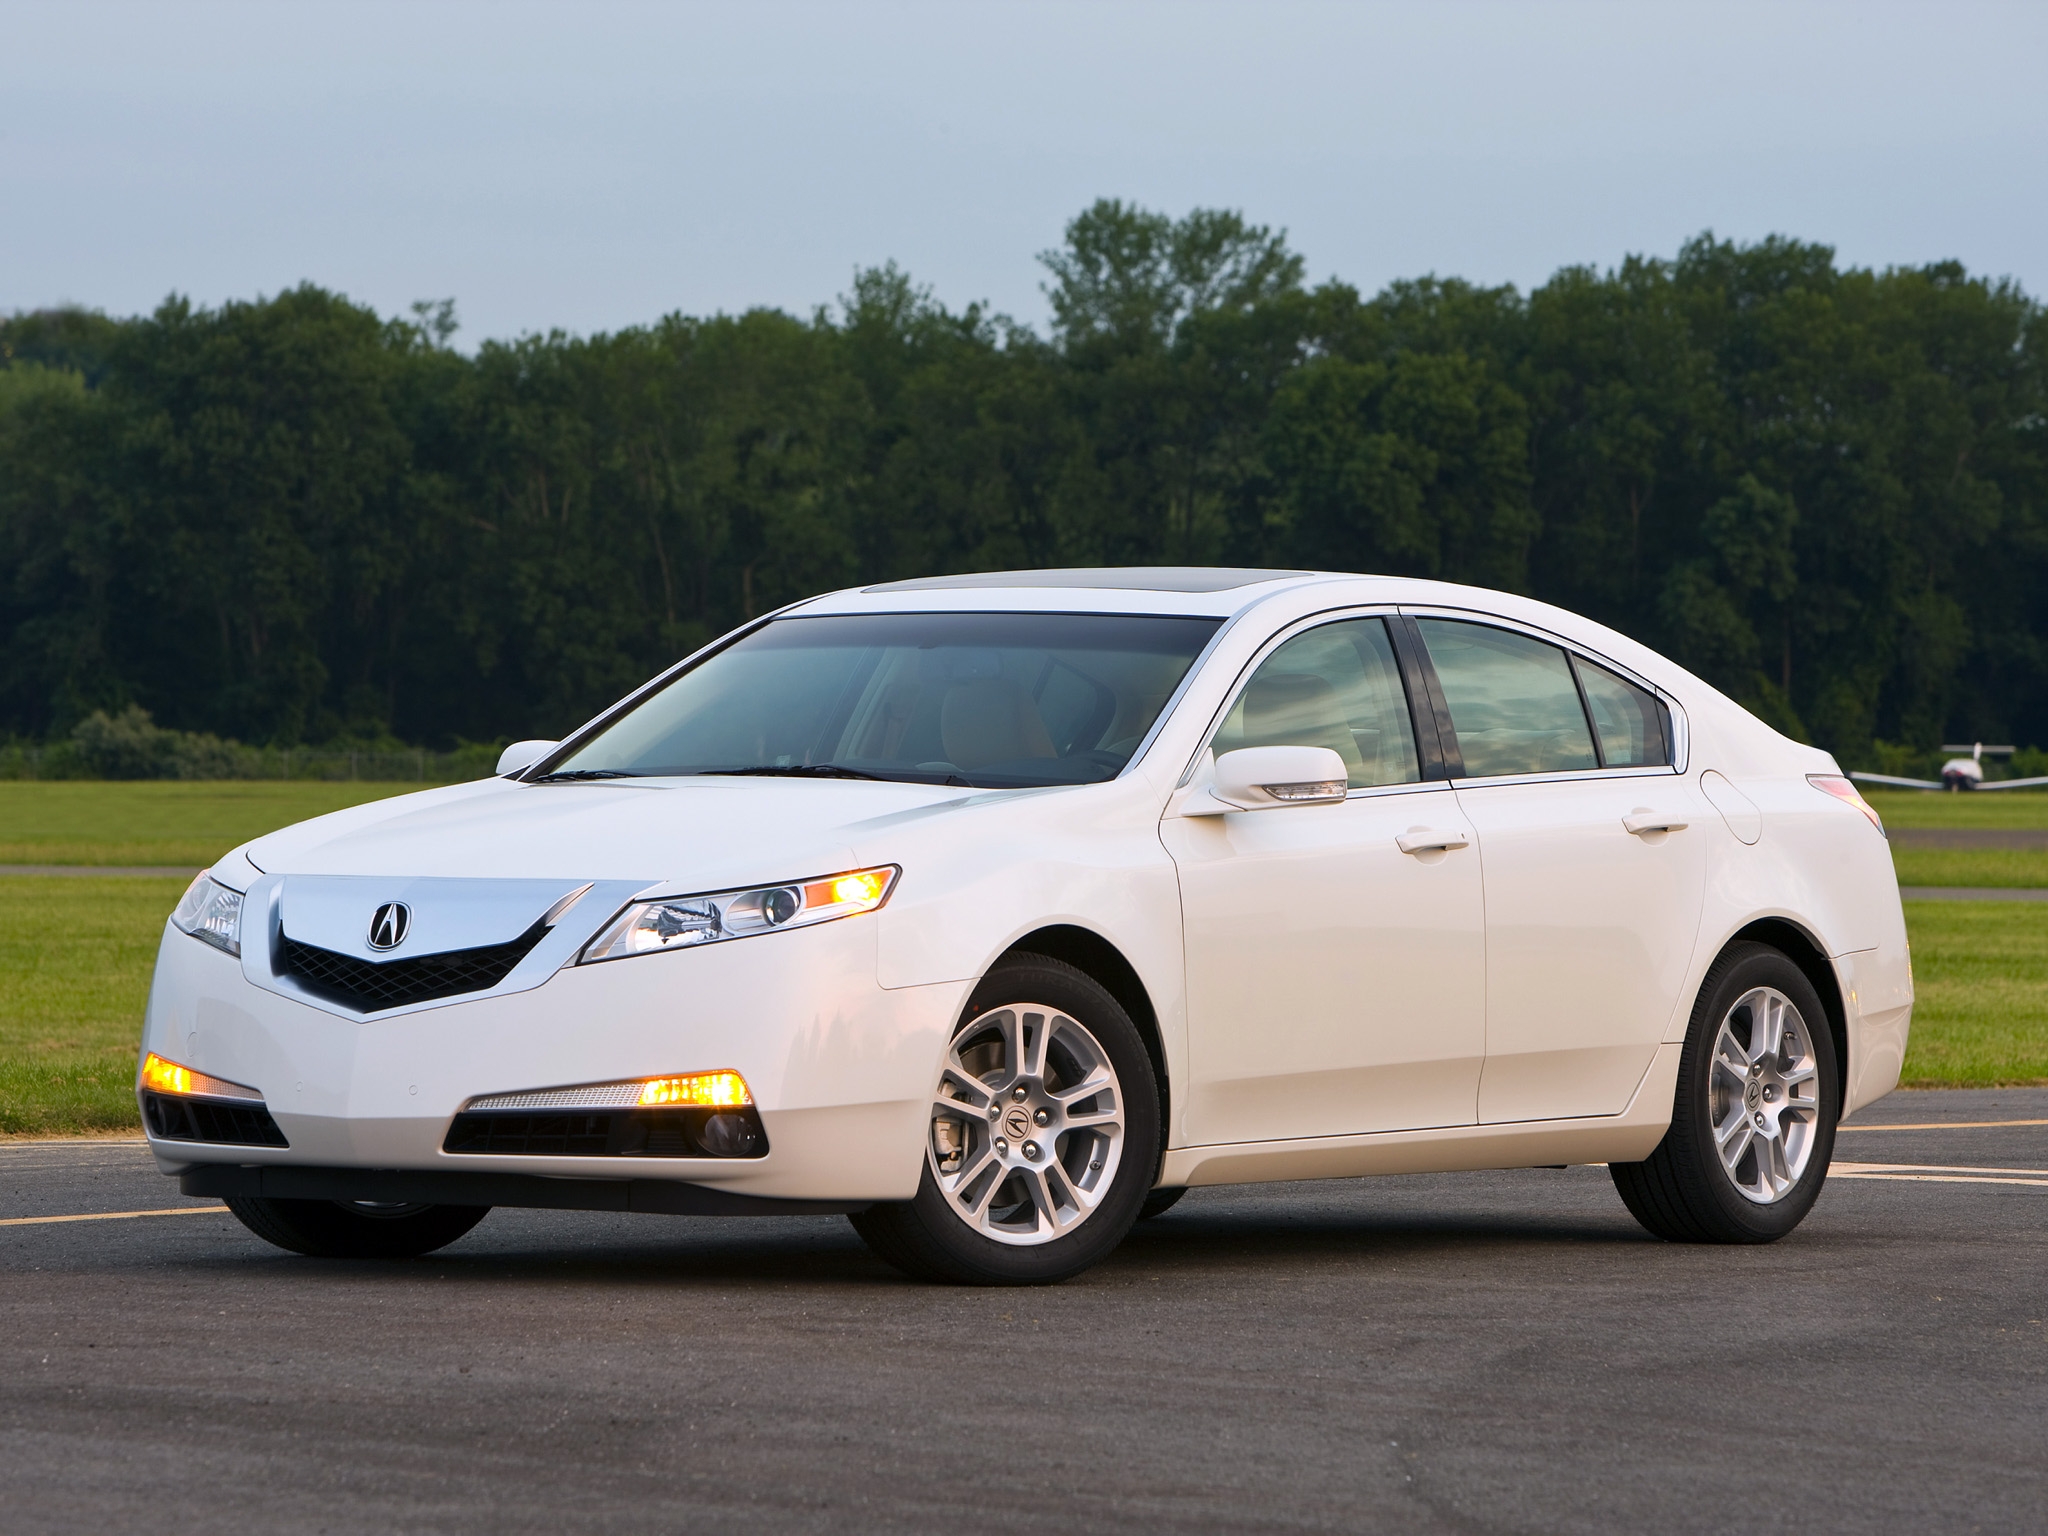 cars, auto, nature, trees, grass, acura, white, side view, style, akura, 2008, tl